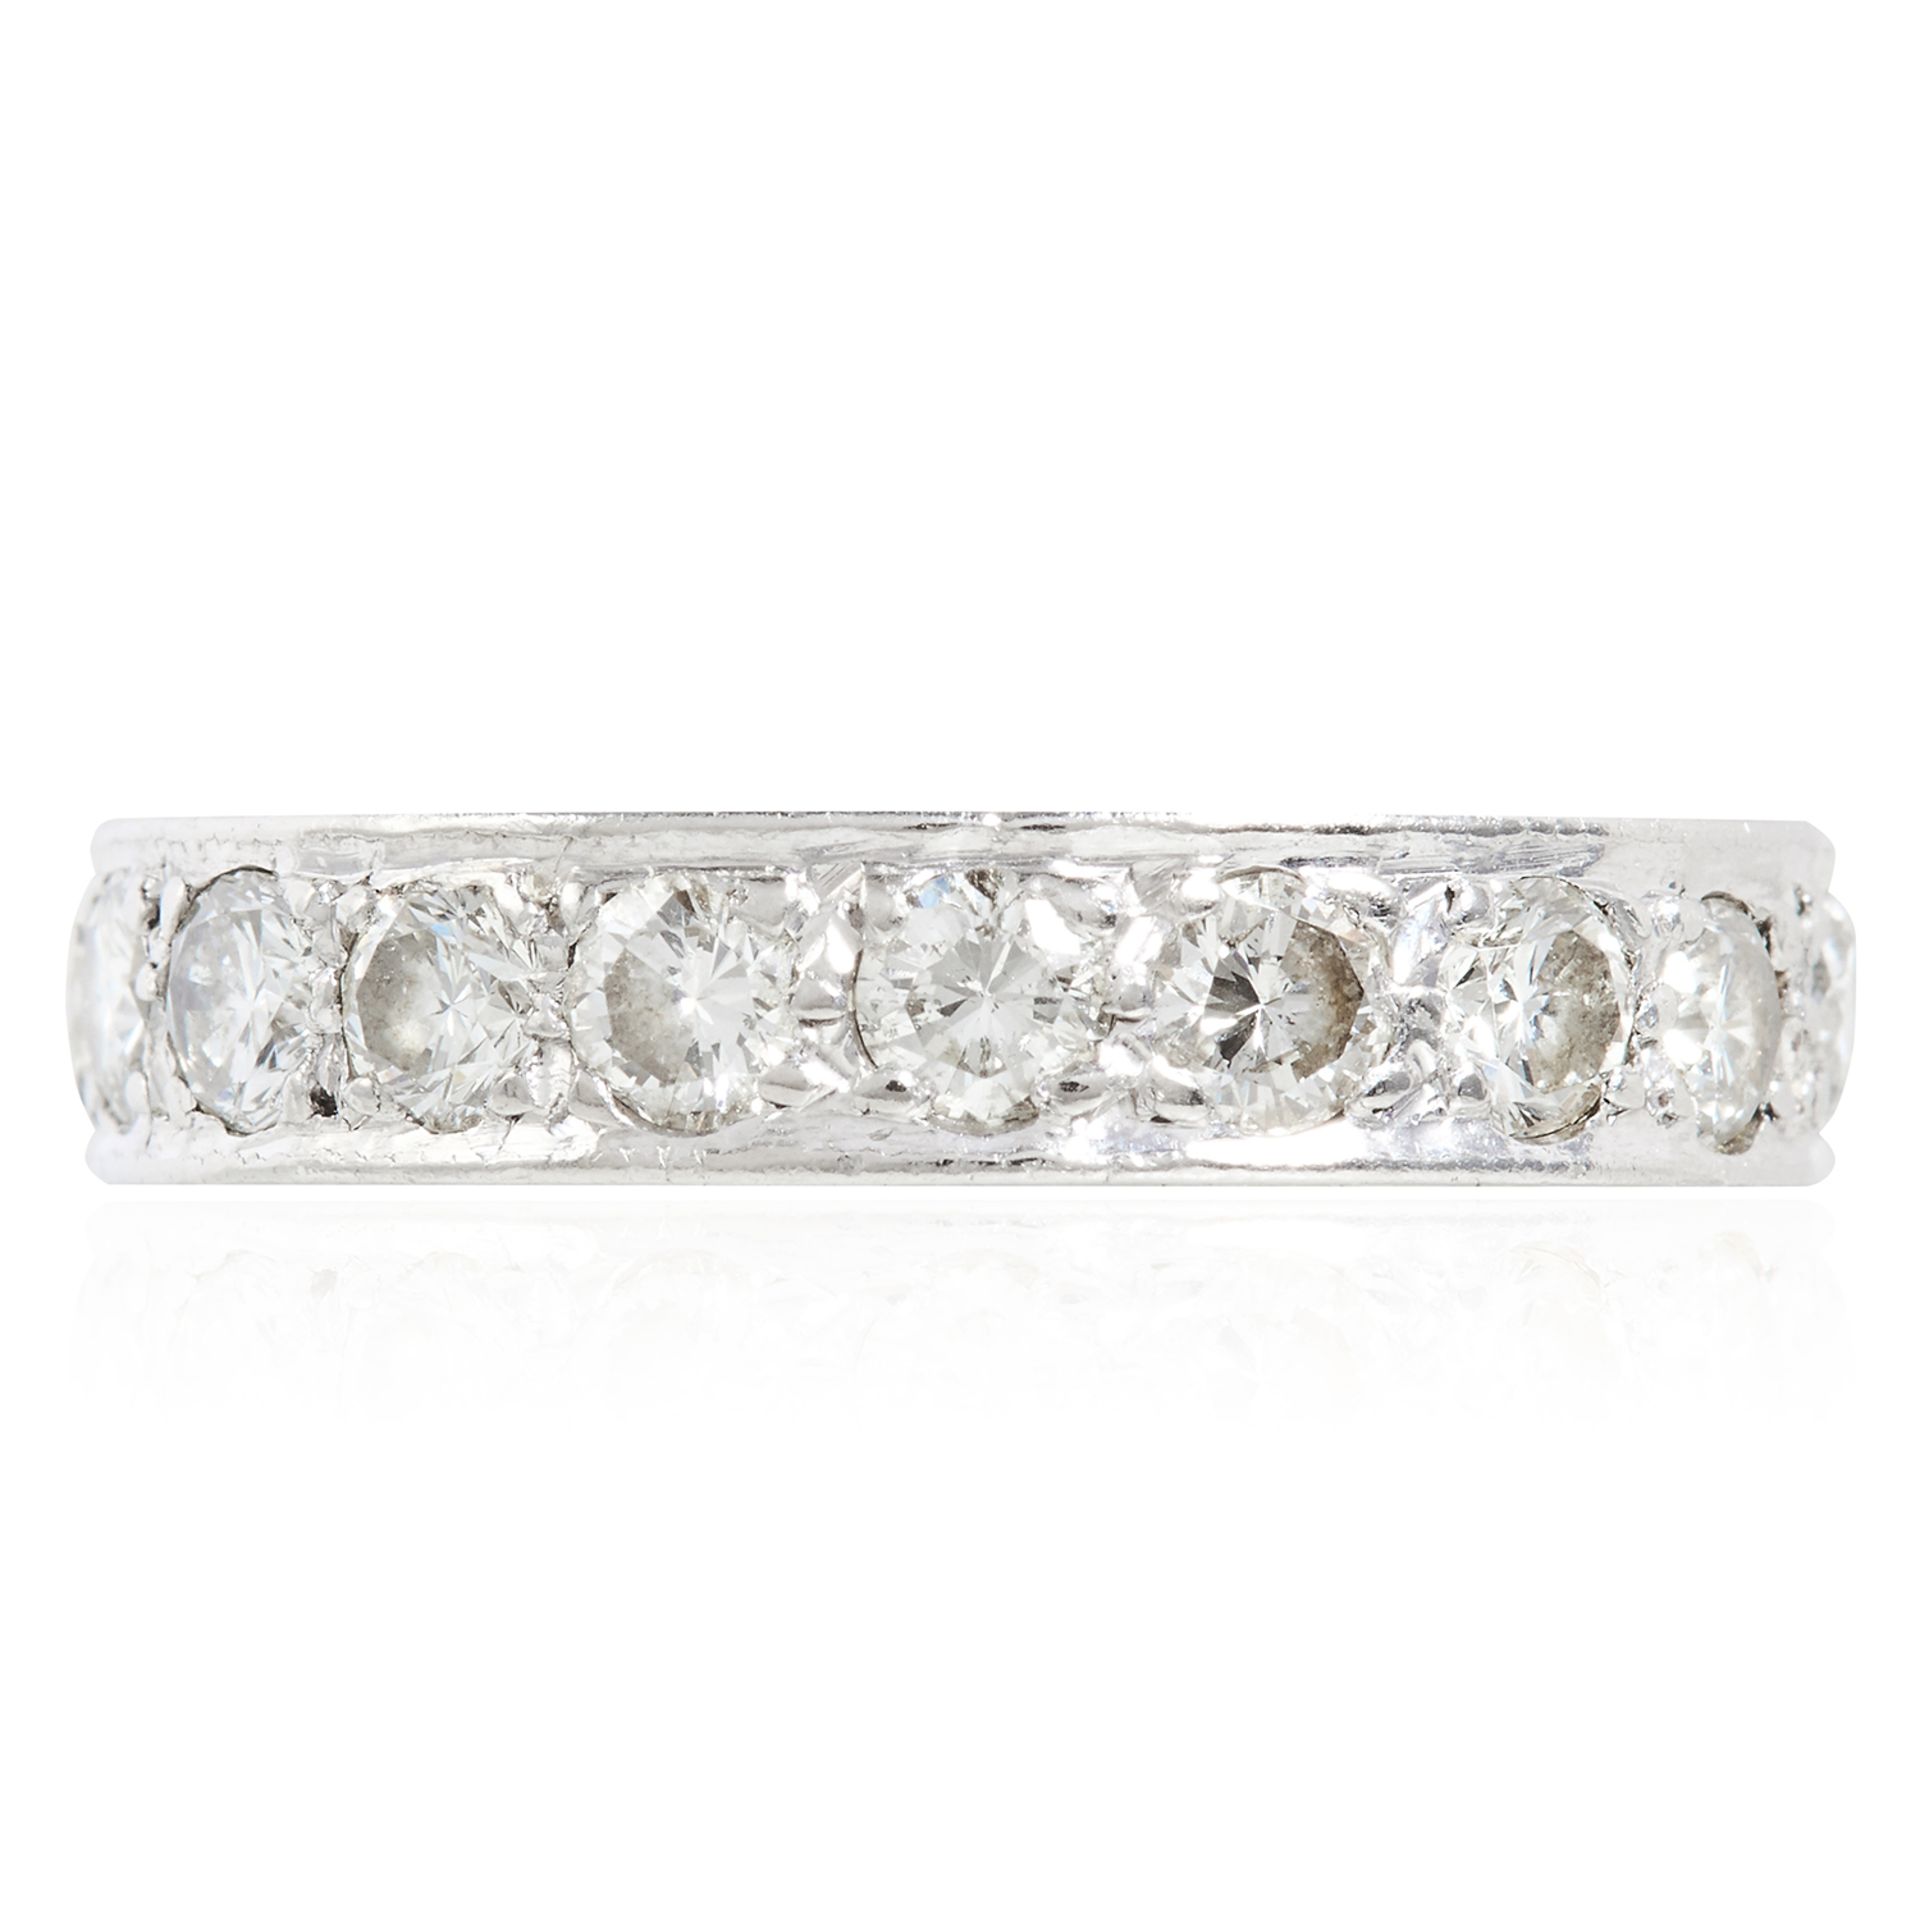 A 1.50 CARAT DIAMOND ETERNITY RING in platinum or white gold, set with a single row of round cut